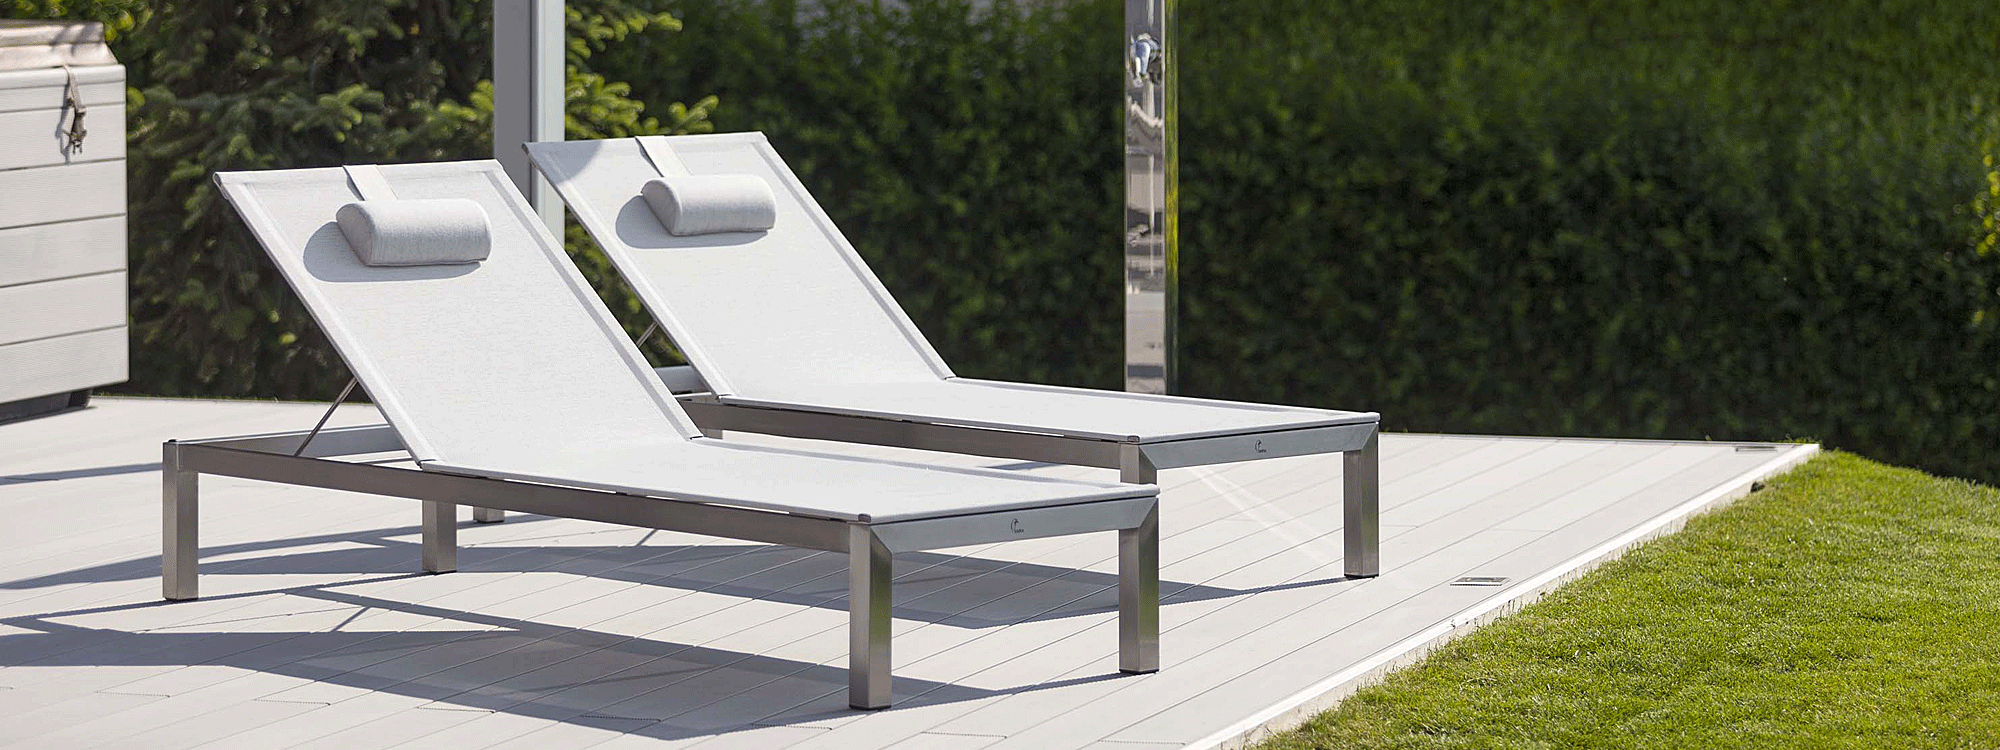 Image of pair of Leuven stainless steel sun loungers with white Batyline seat and backrest on sunny terrace